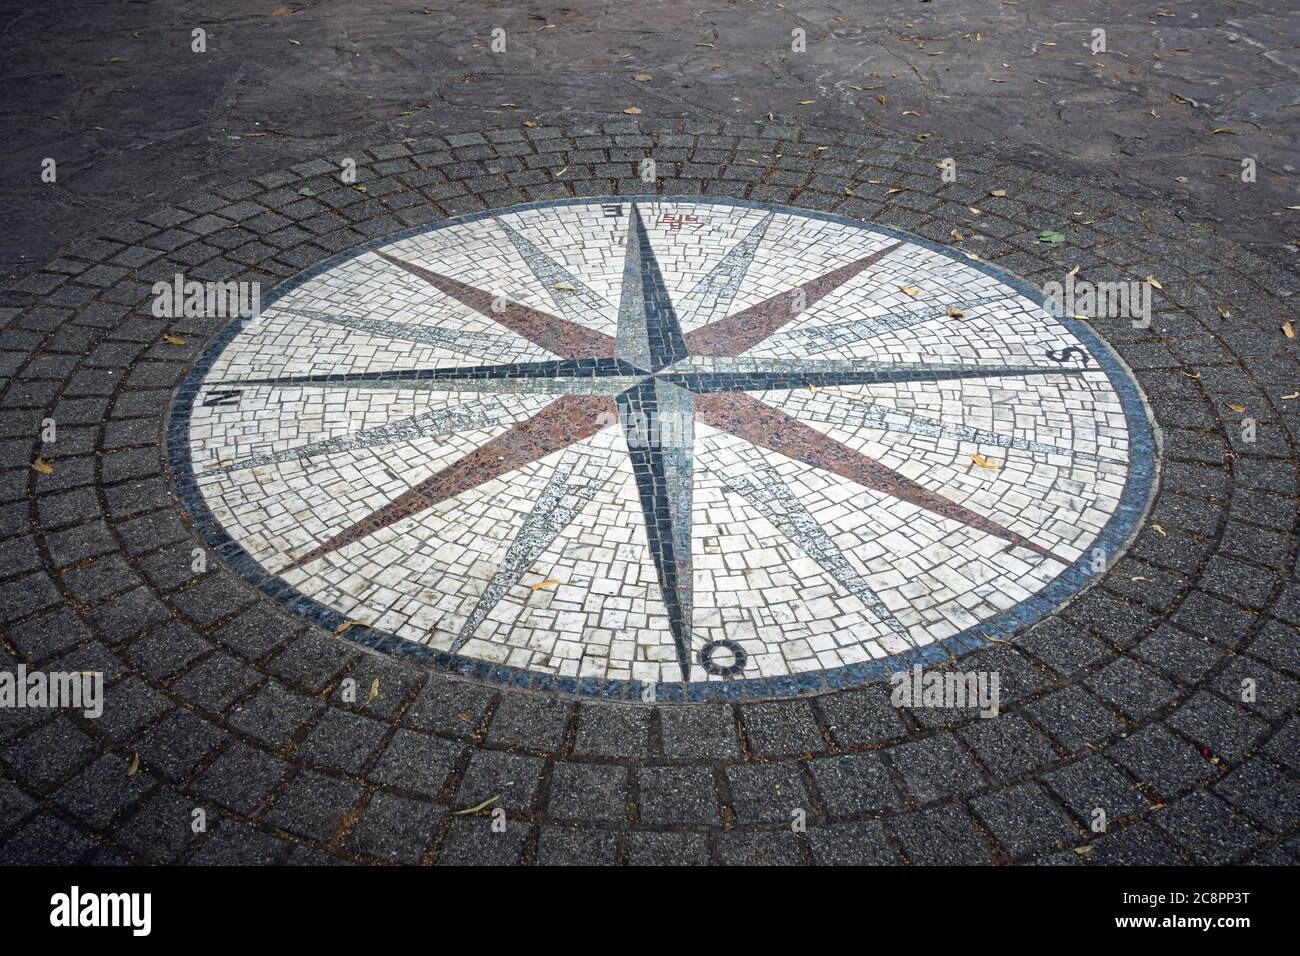 Mosaic compass rose on the floor surrounded by cobblestones Stock Photo